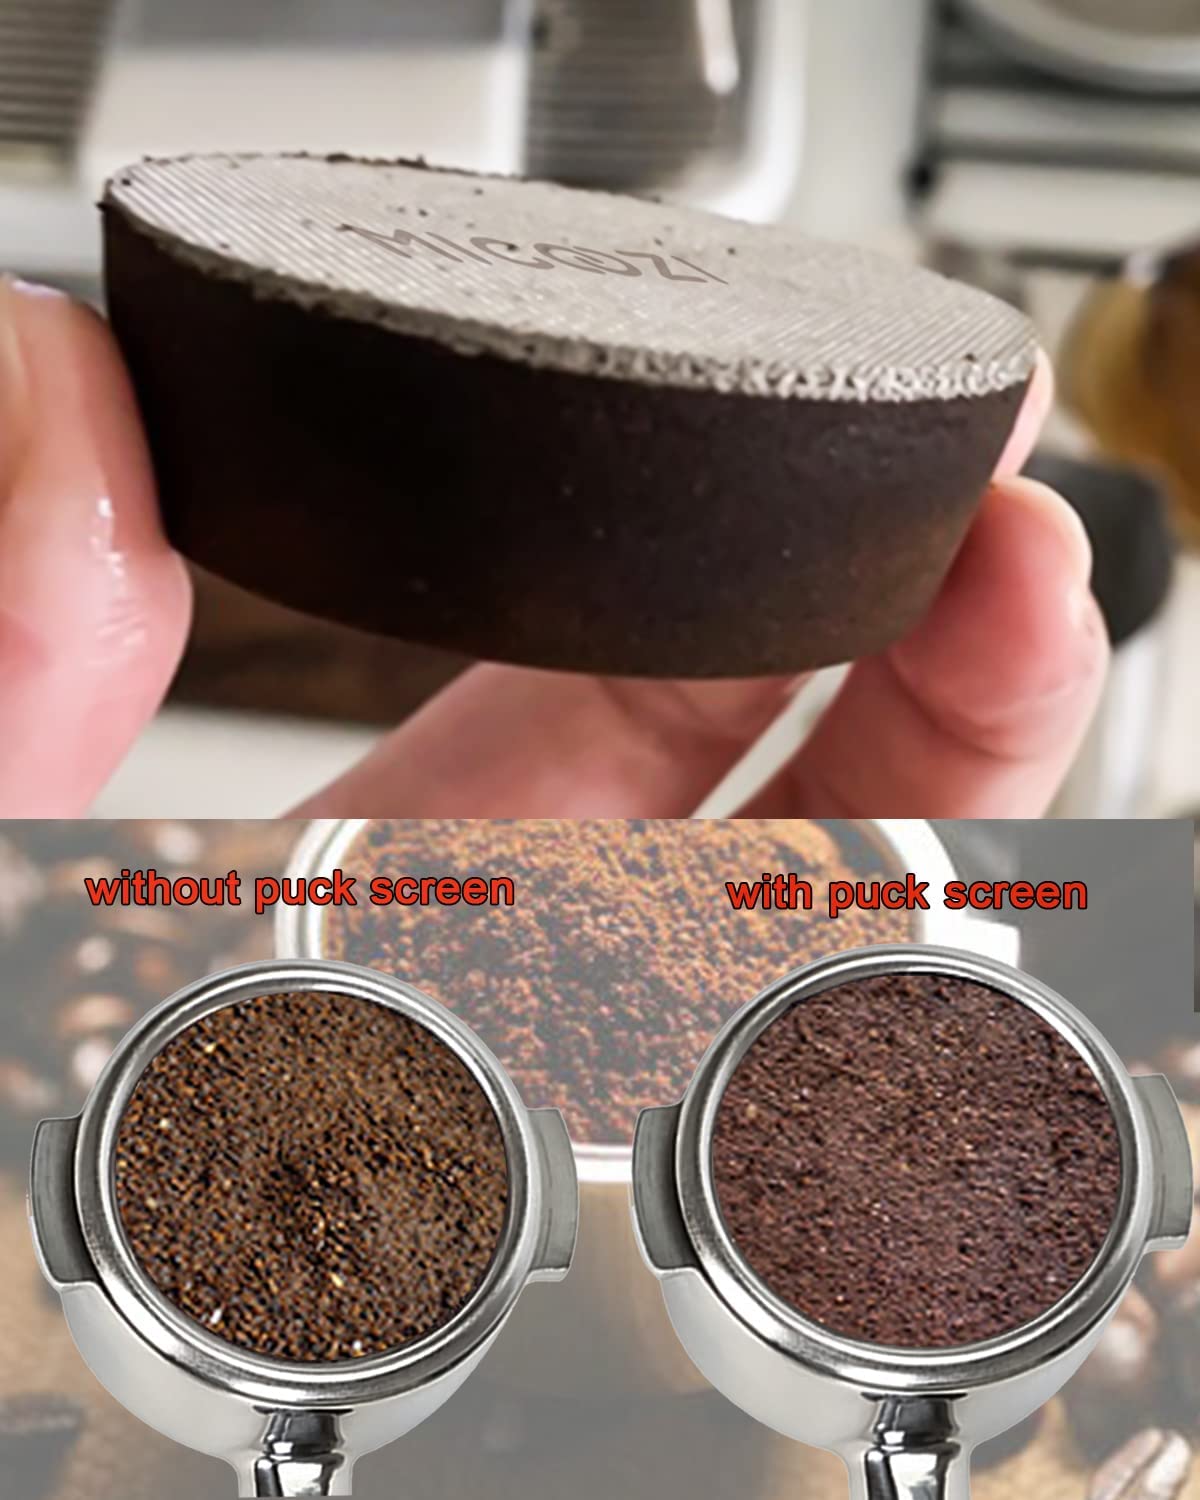 Buy MIGOOZI 49mm Espresso Puck Screen, 1.7mm Thickness 100μm Stainless Steel Professional Barista Coffee Filter Mesh Plate for Espresso Portafilter Filter Basket (49mm), Silver Online at Lowest Price in Singapore. B09KC61BSM